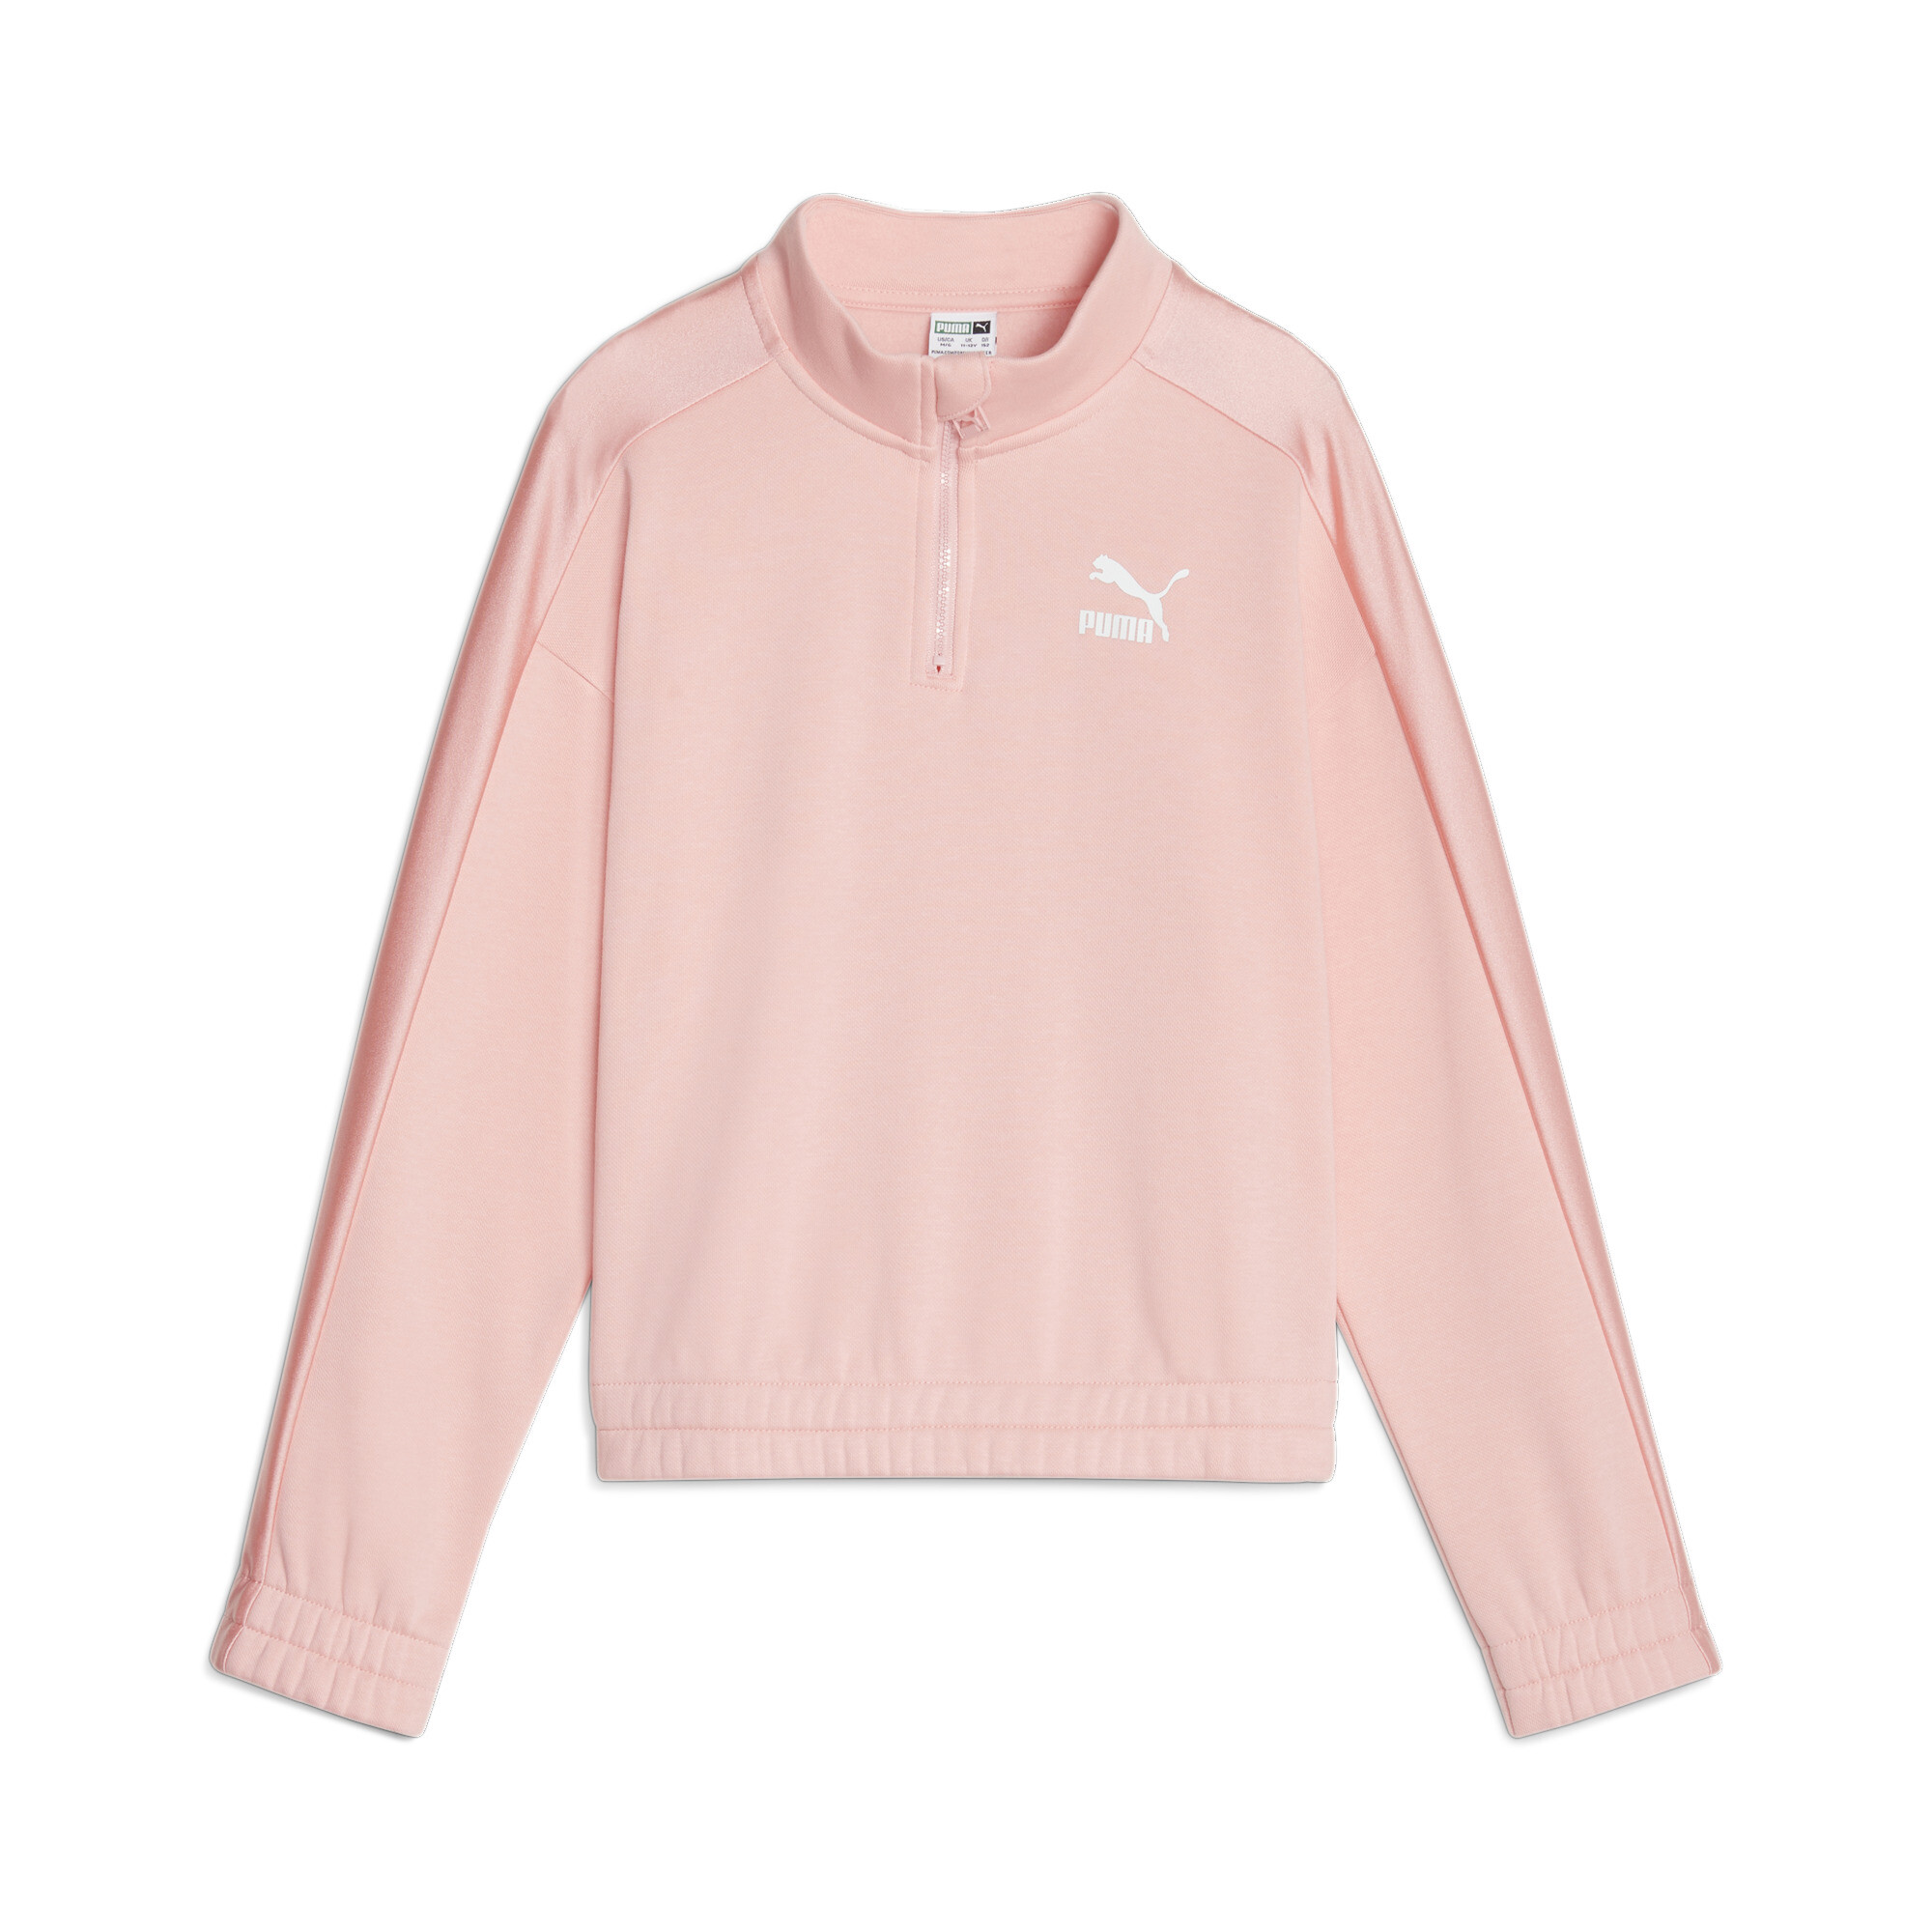 Women's Puma T7 Youth Quarter-Zip Top, Pink Top, Size 9-10Y Top, Clothing